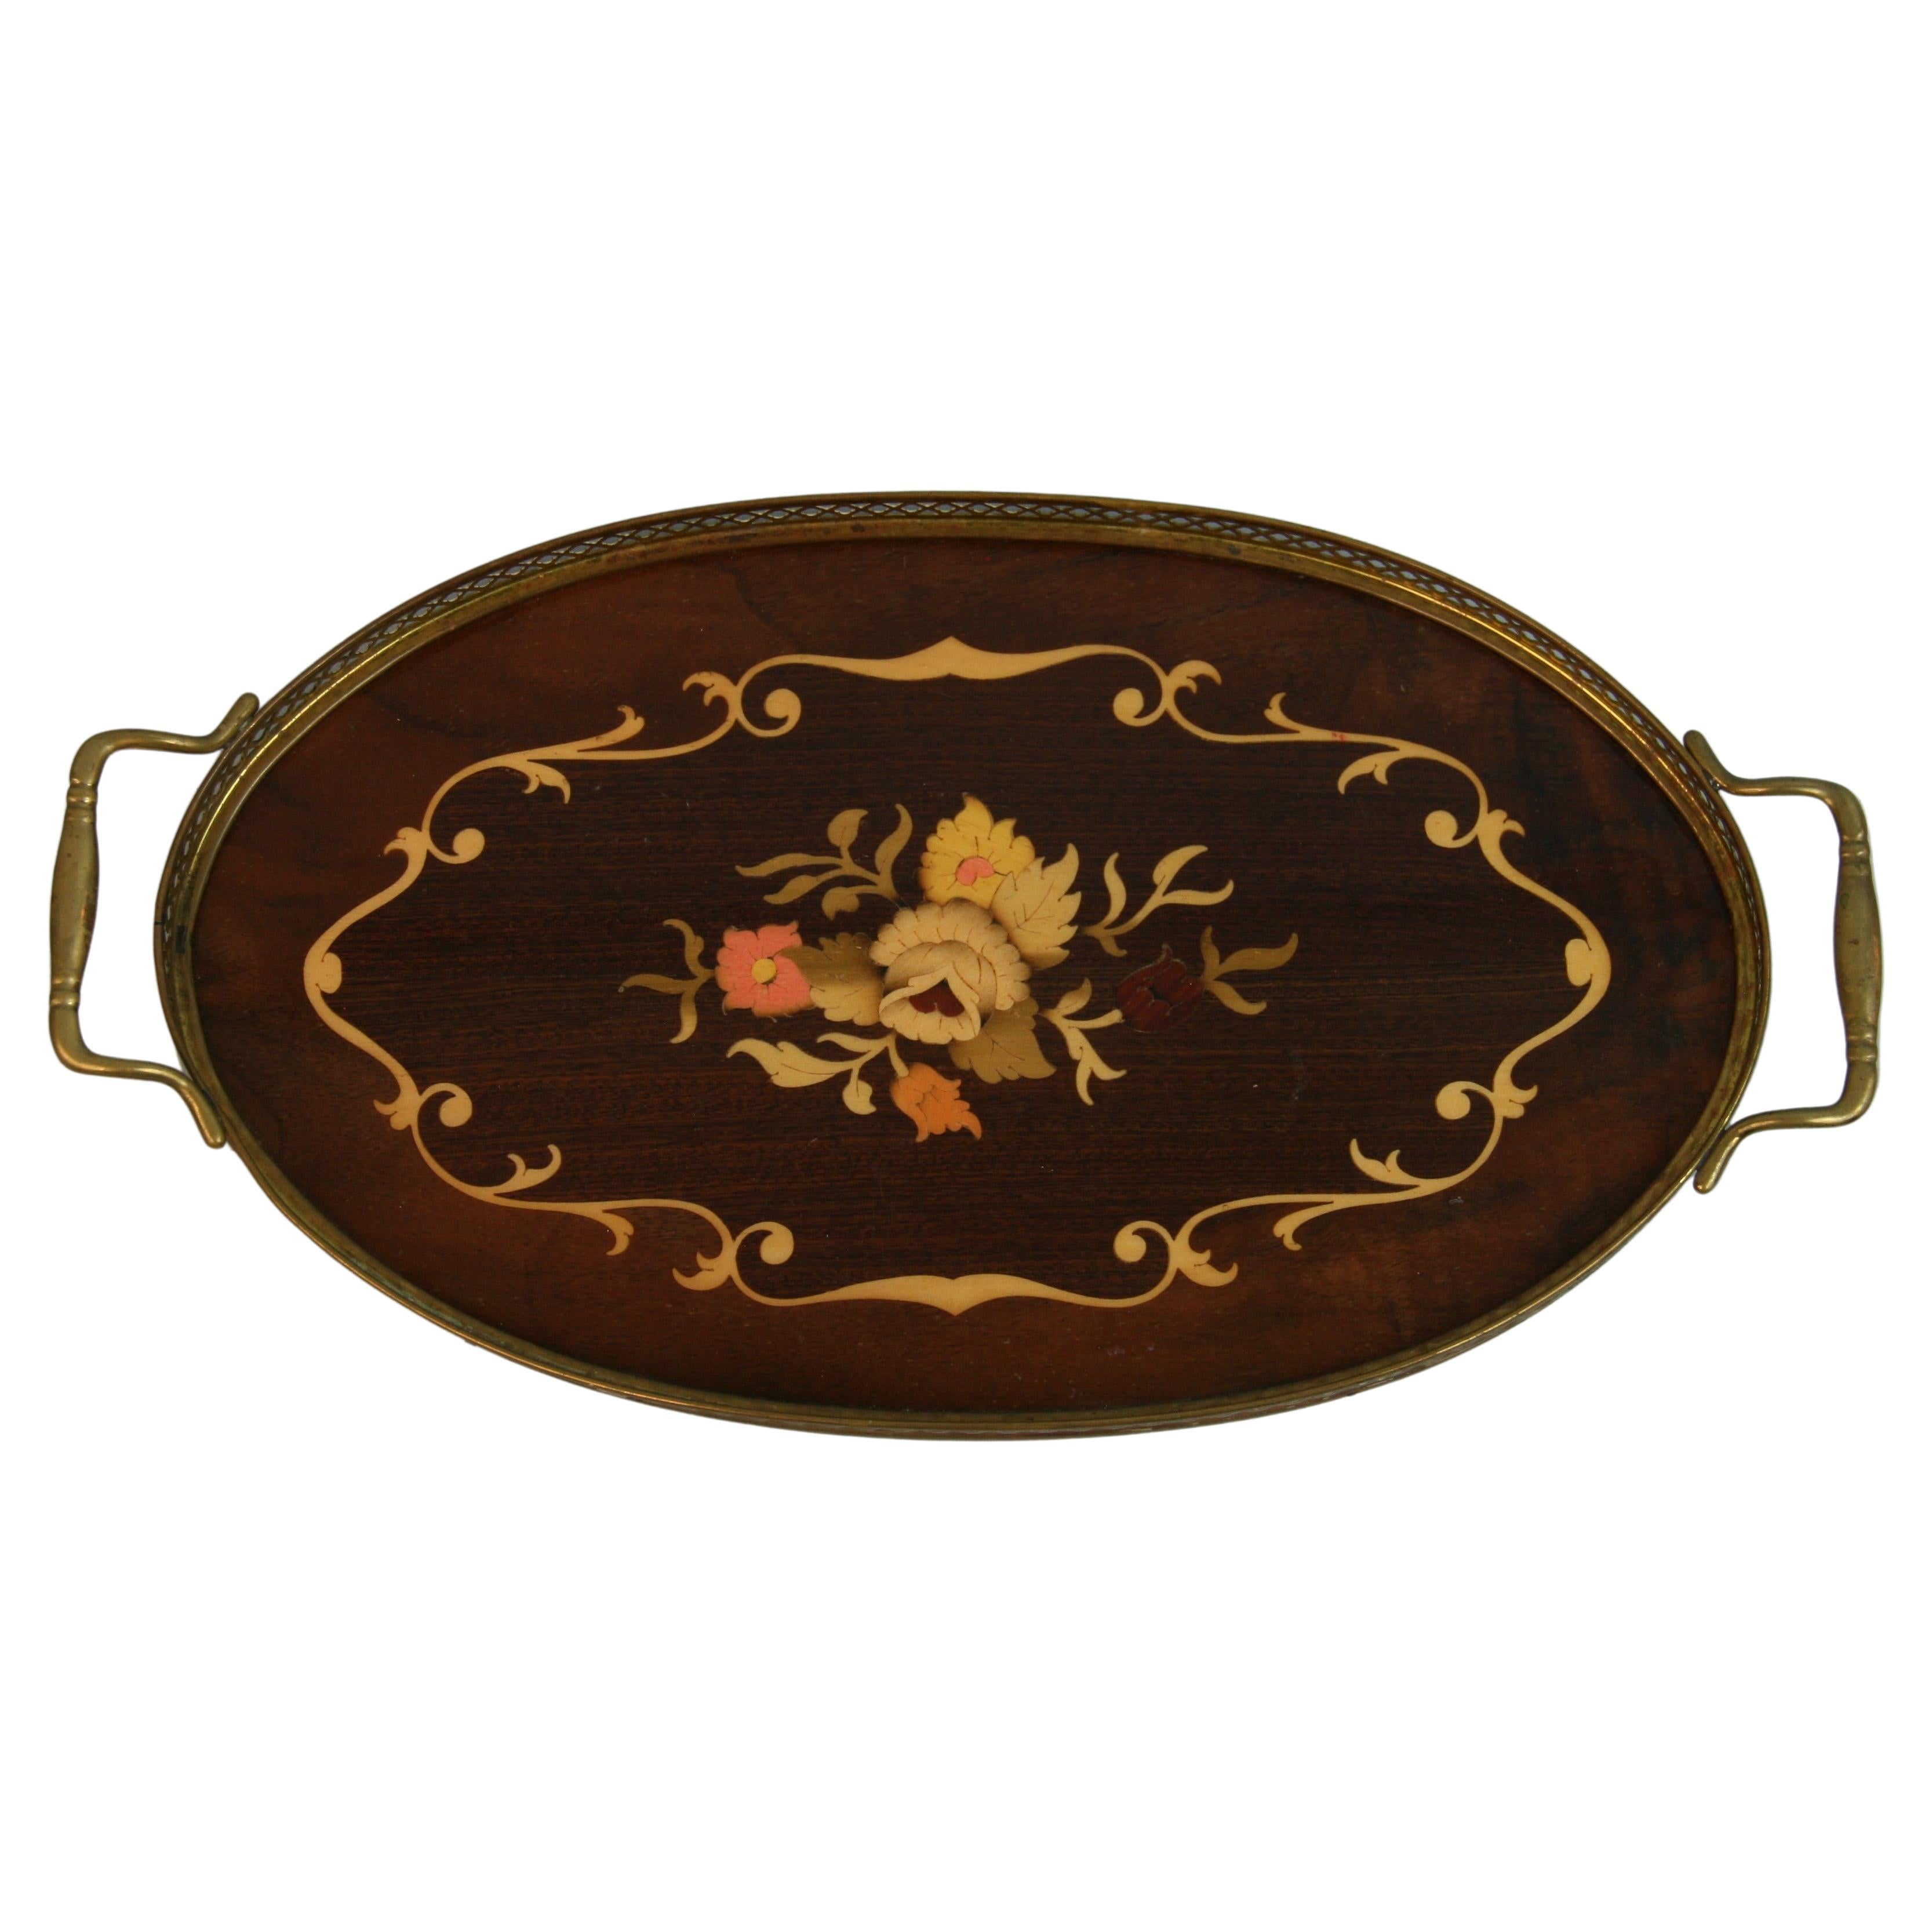 Italian Serving Tray Inlaid Wood Brass Rim and Handles, 1960's For Sale